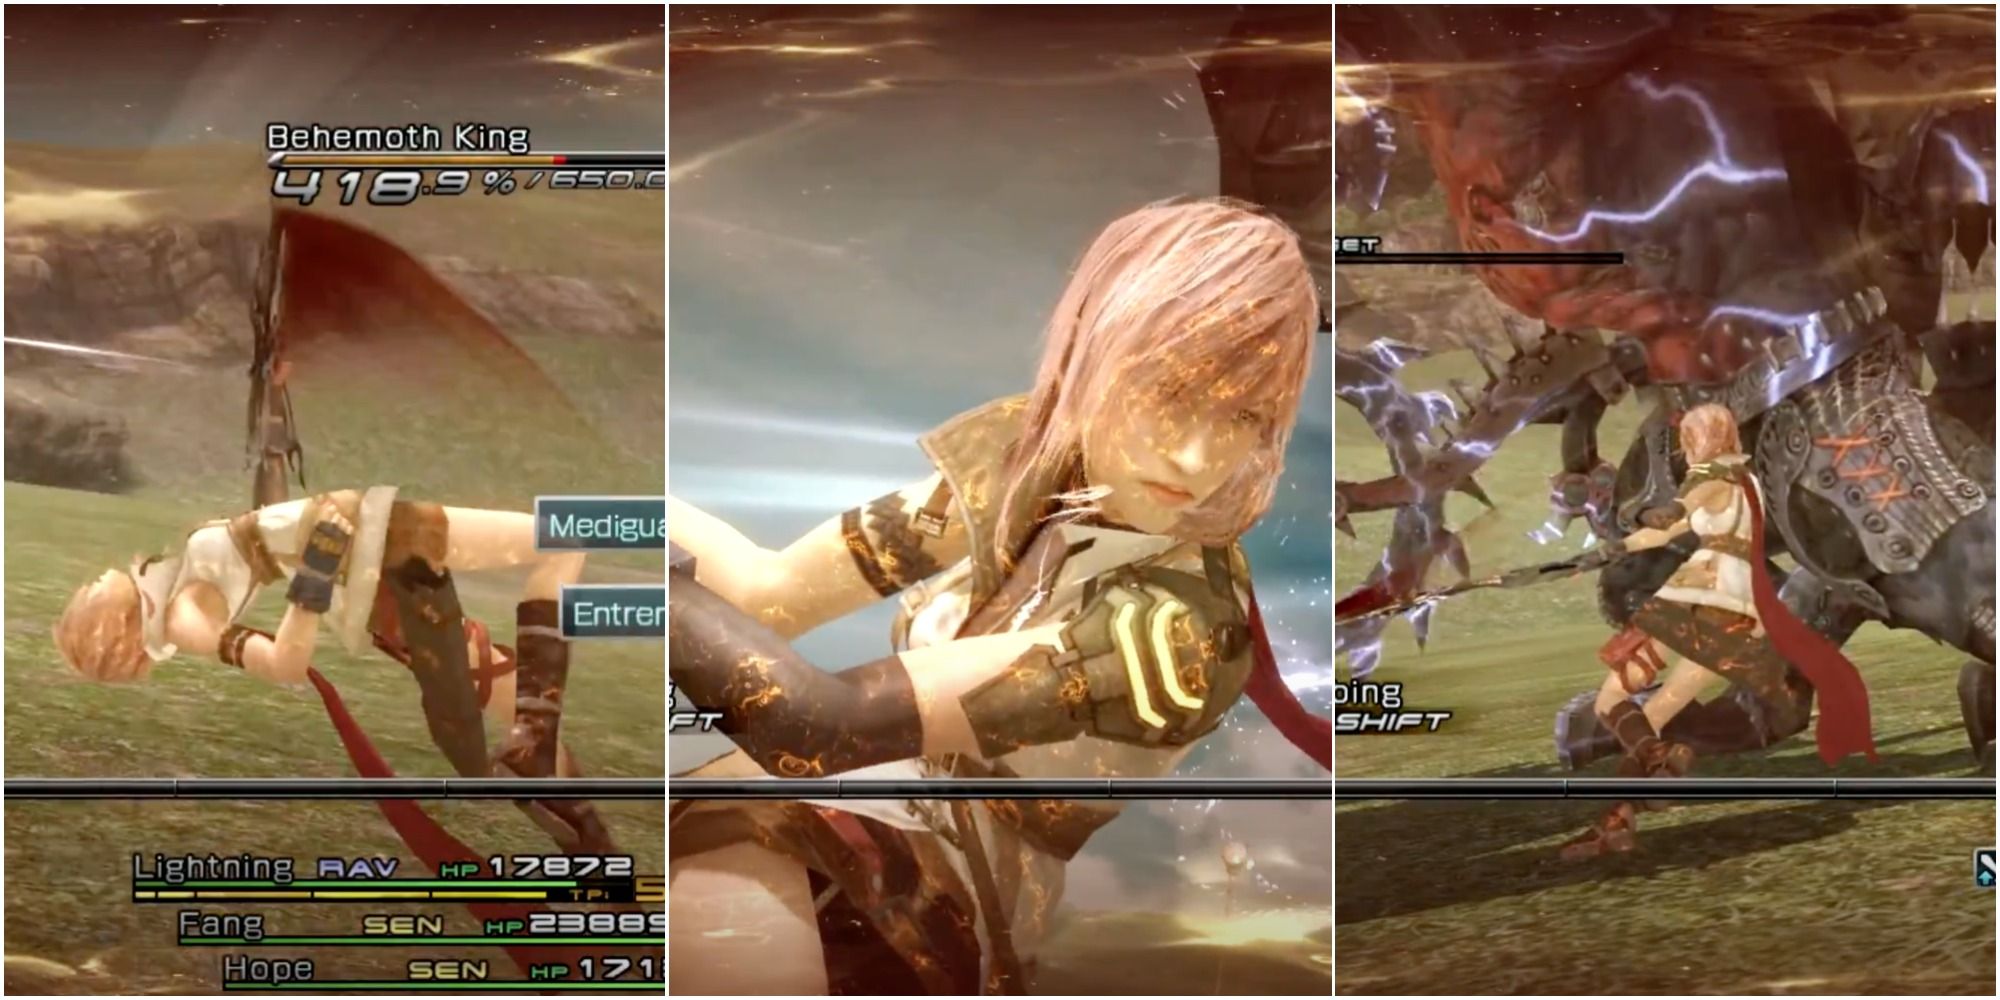 Lightning's Full ATB Skill in Final Fantasy 13 - Army of One